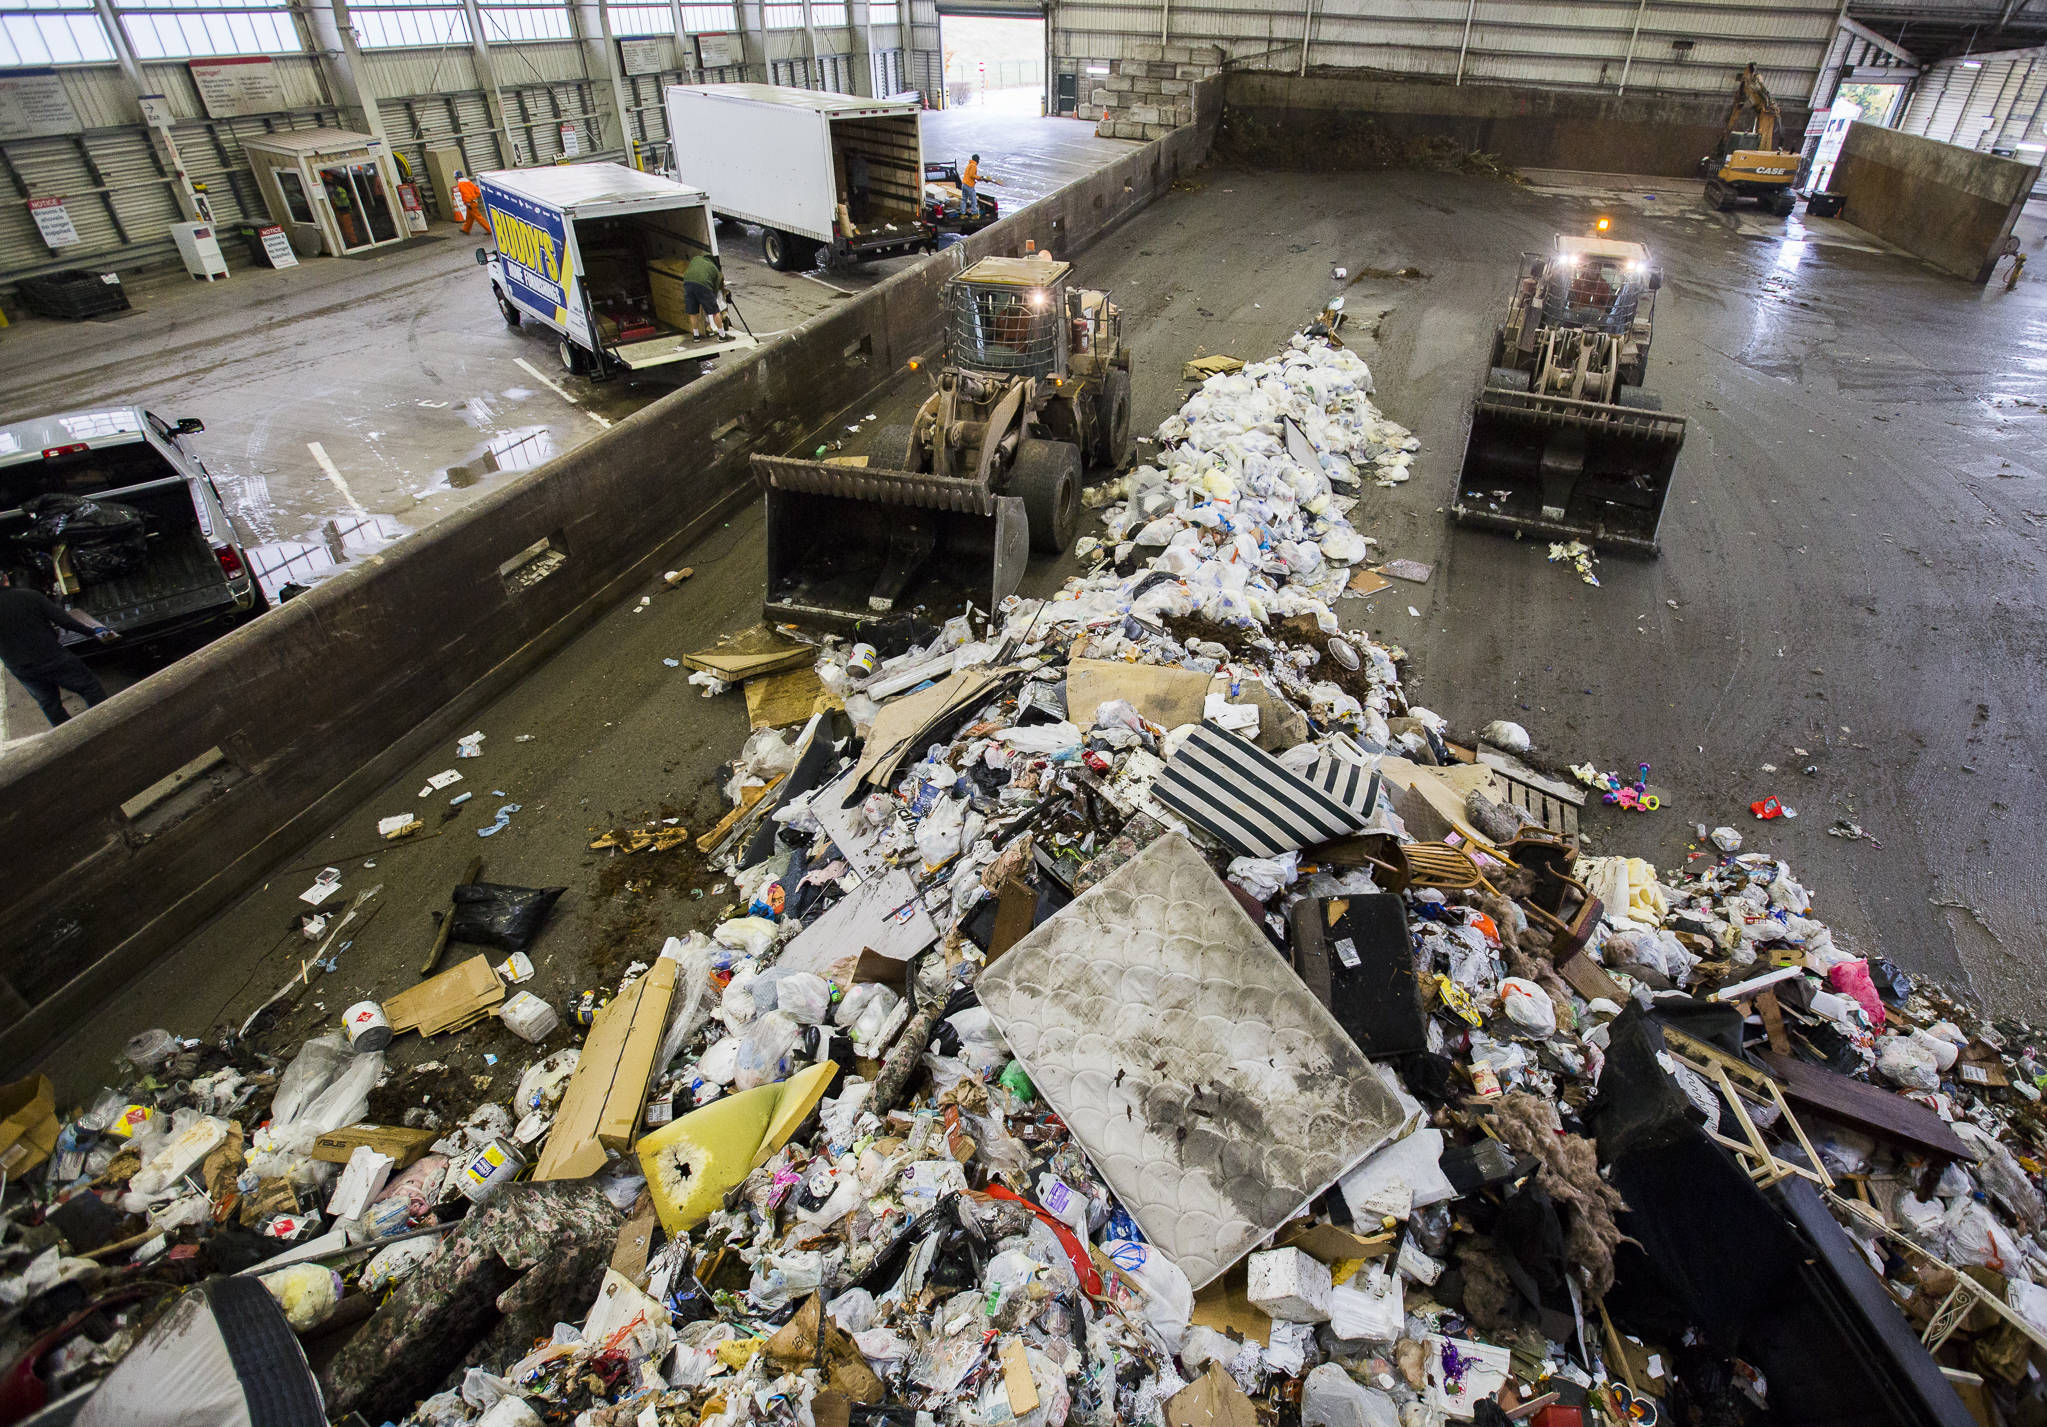 Front loaders push trash forward into one of the compactors at the Airport Road Recycling & Transfer Station on Nov. 24 in Everett. (Olivia Vanni / The Herald)